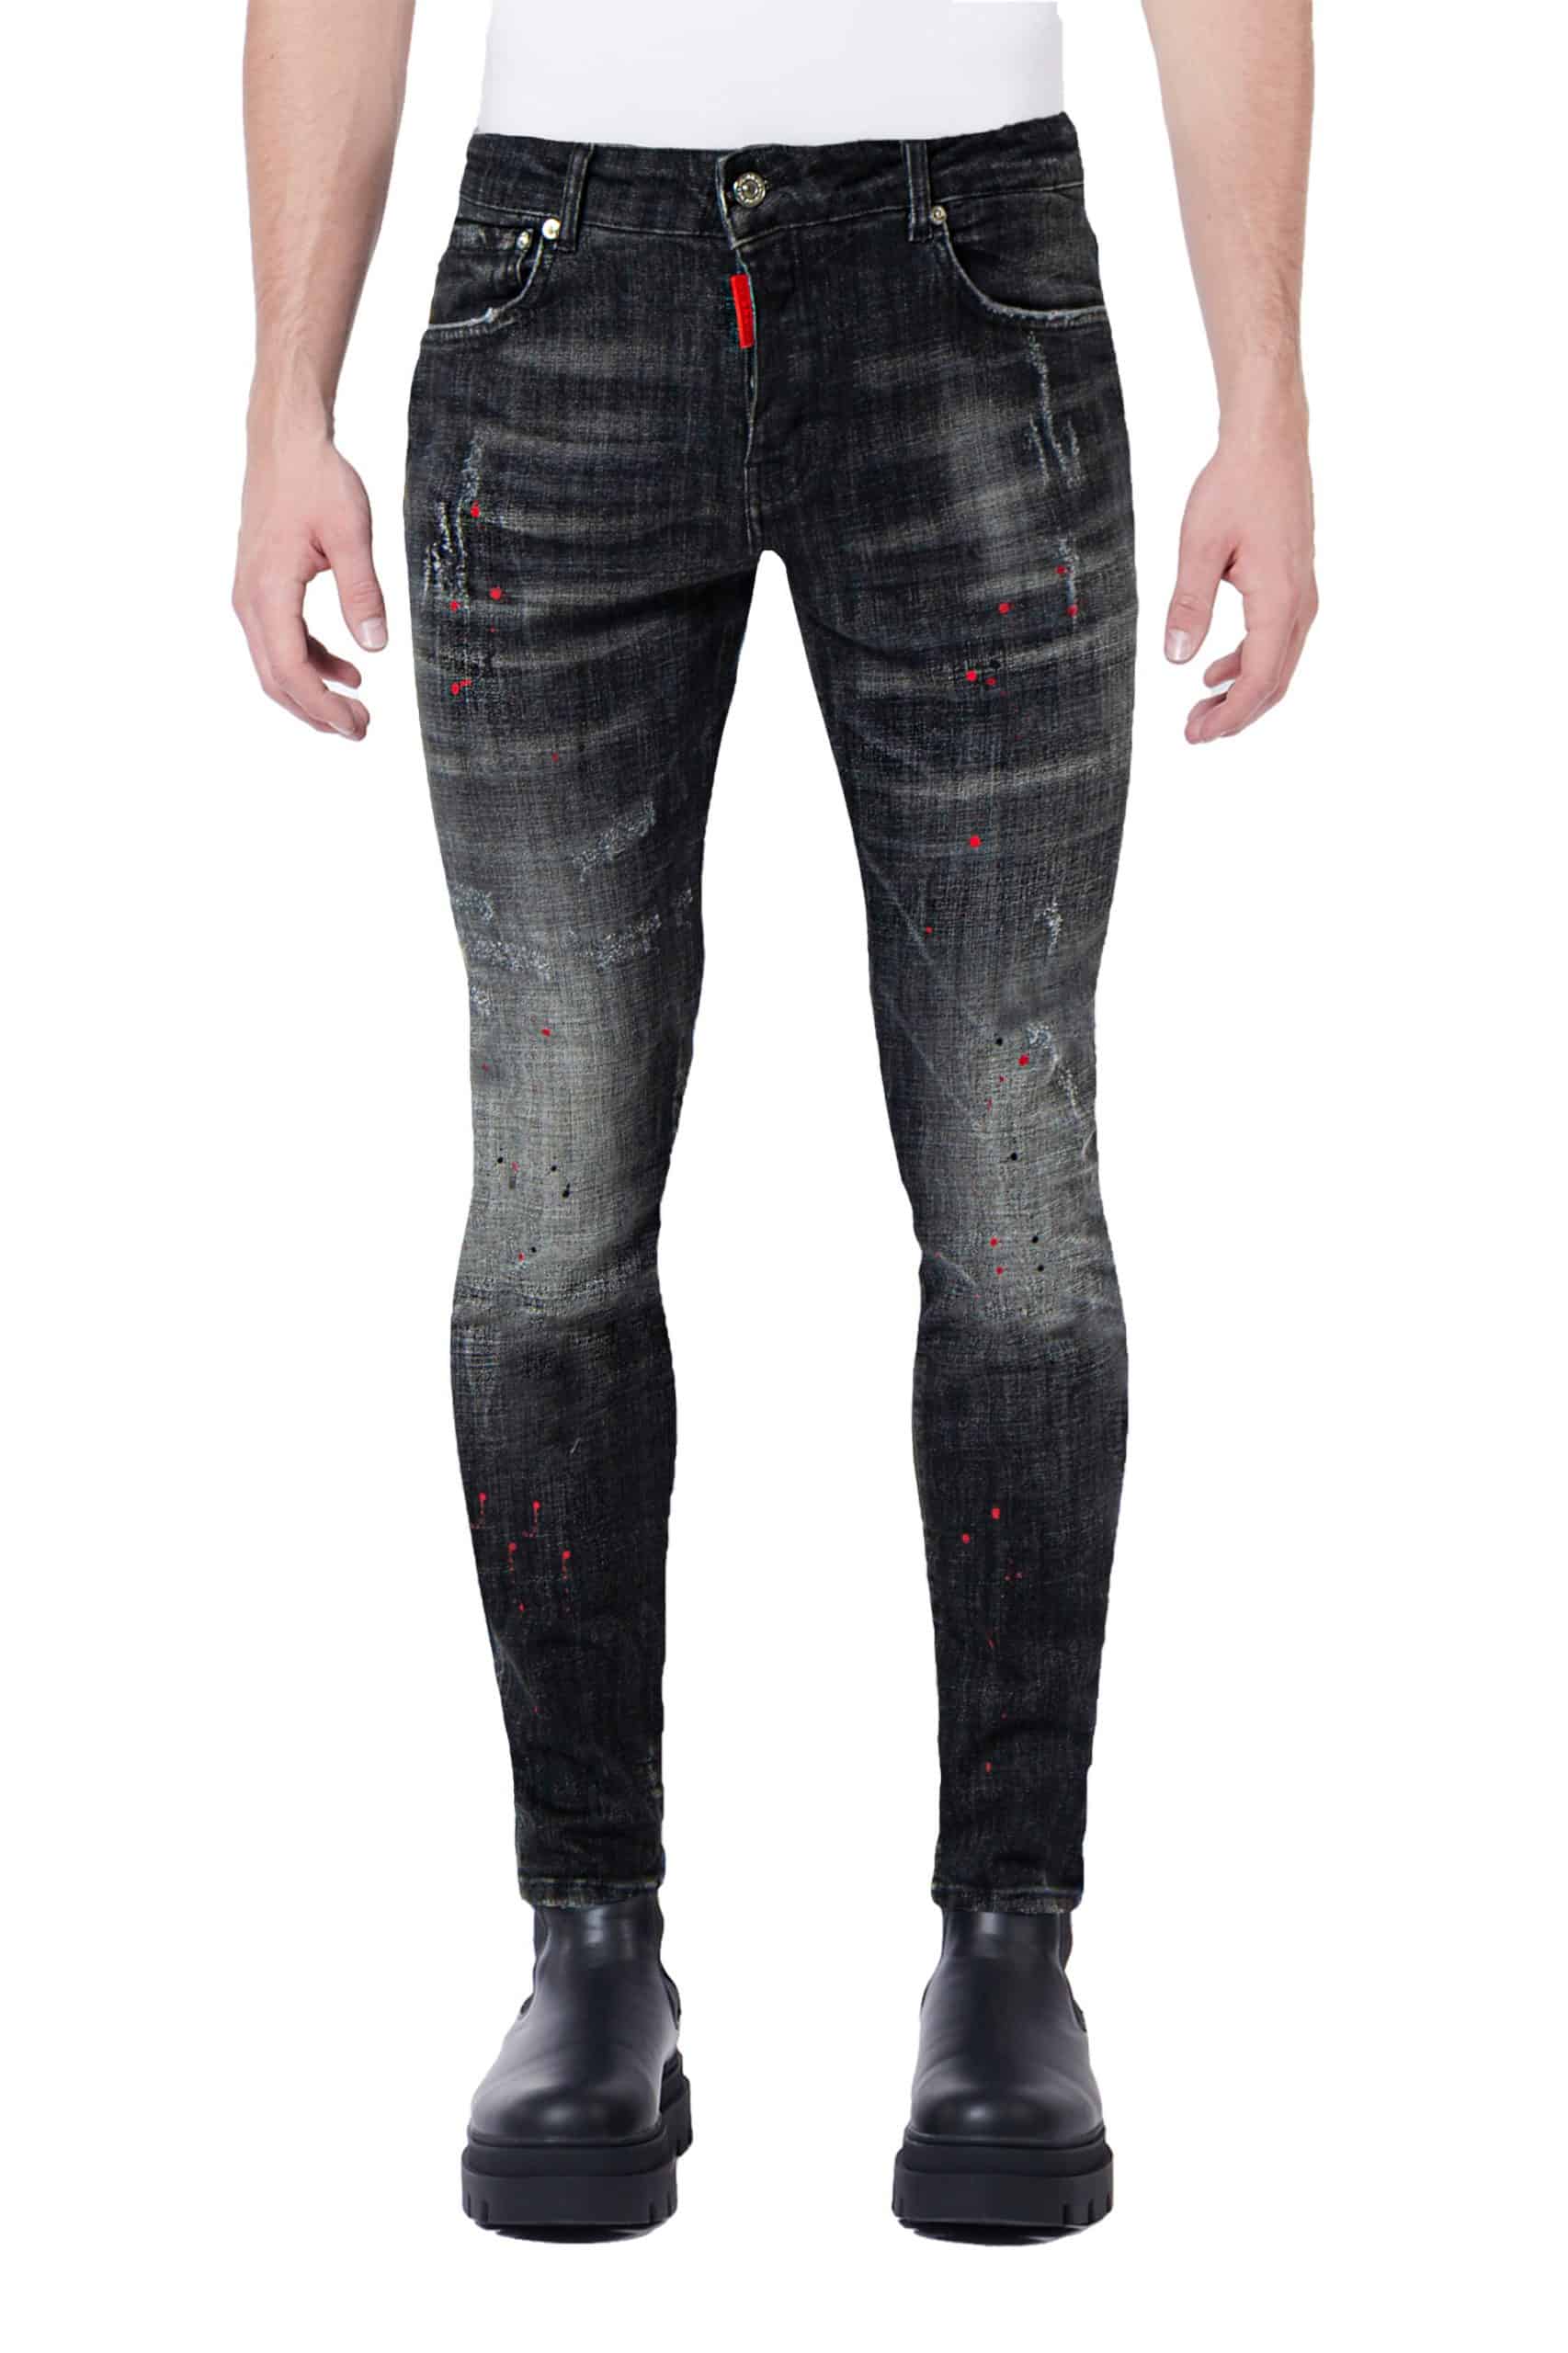 My Brand Black Jeans Distressed Red